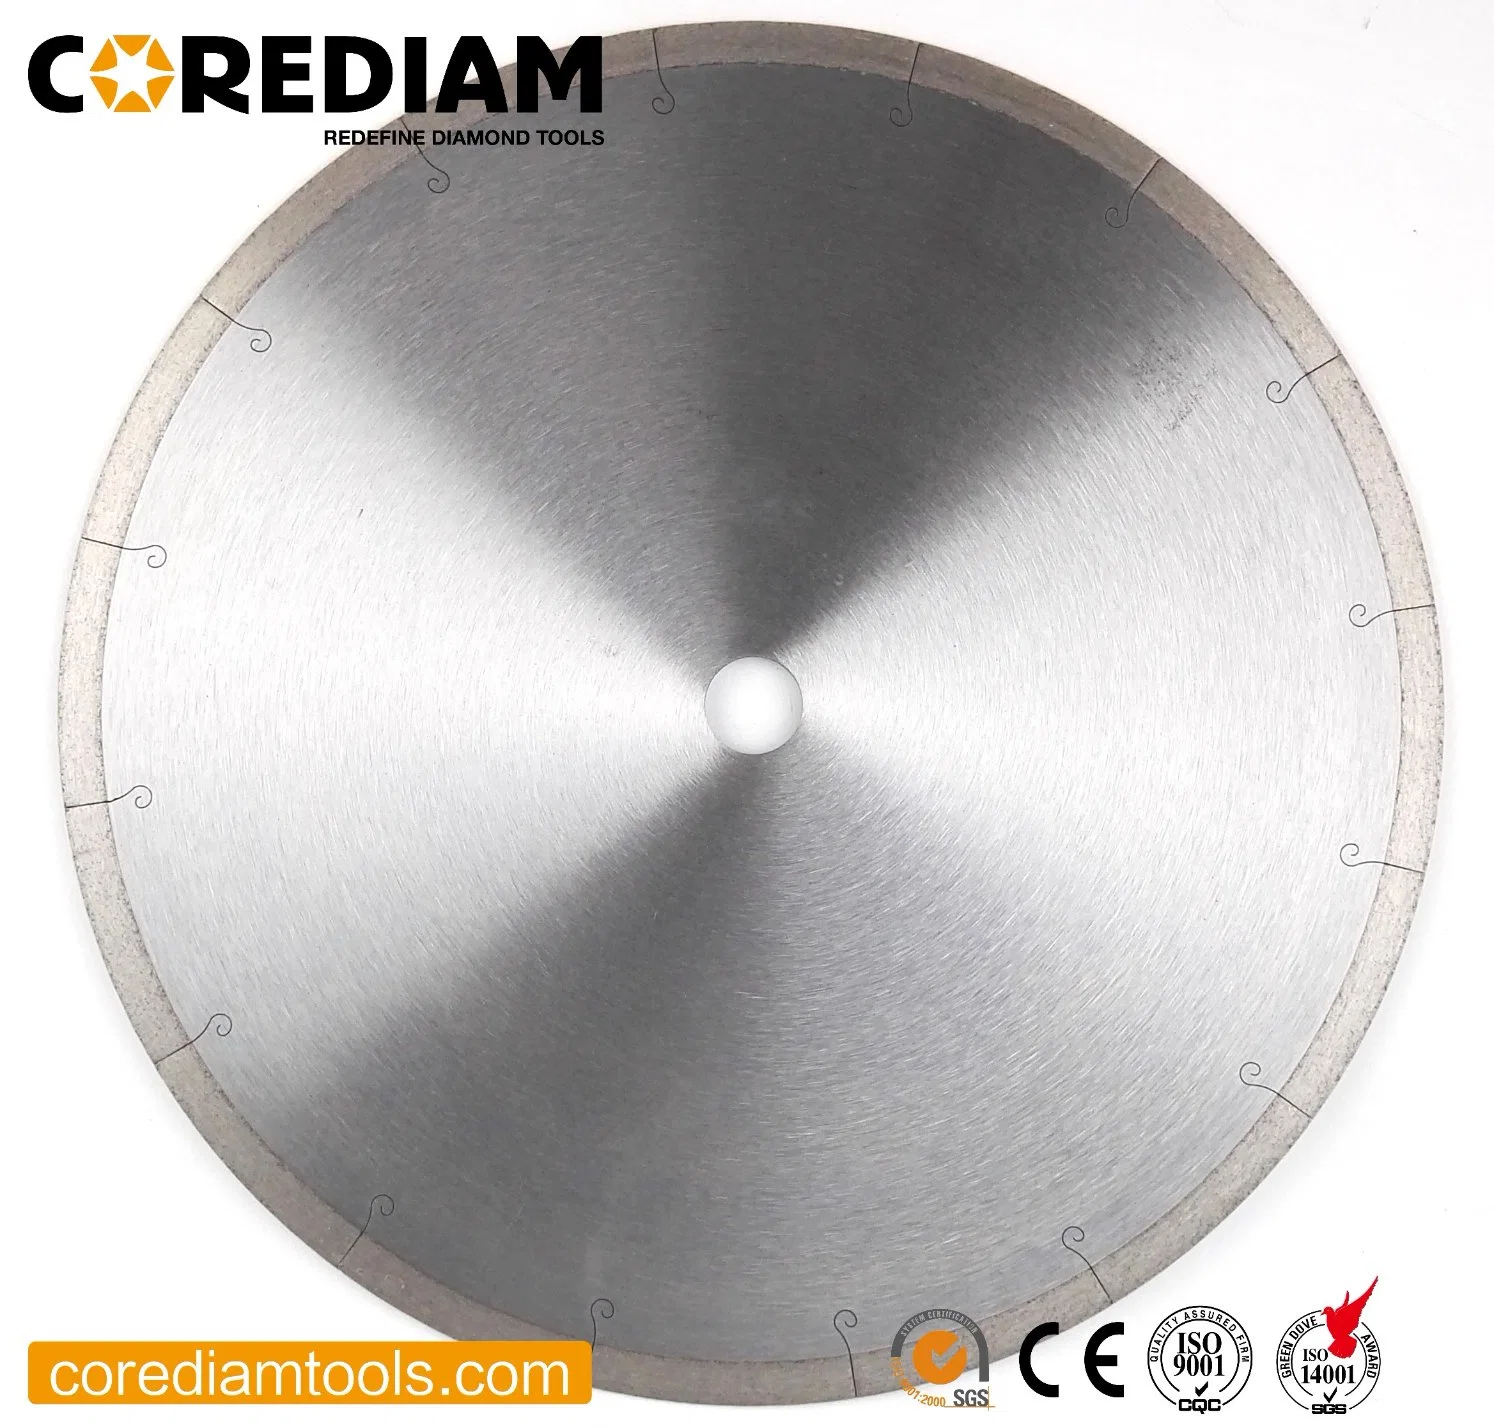 350mm/14-Inch Sinter Hot-Pressed Blade with Silent Cutting Slot for Ceramic Tile and Porcelain /Diamond Cutting Disc/Diamond Tools